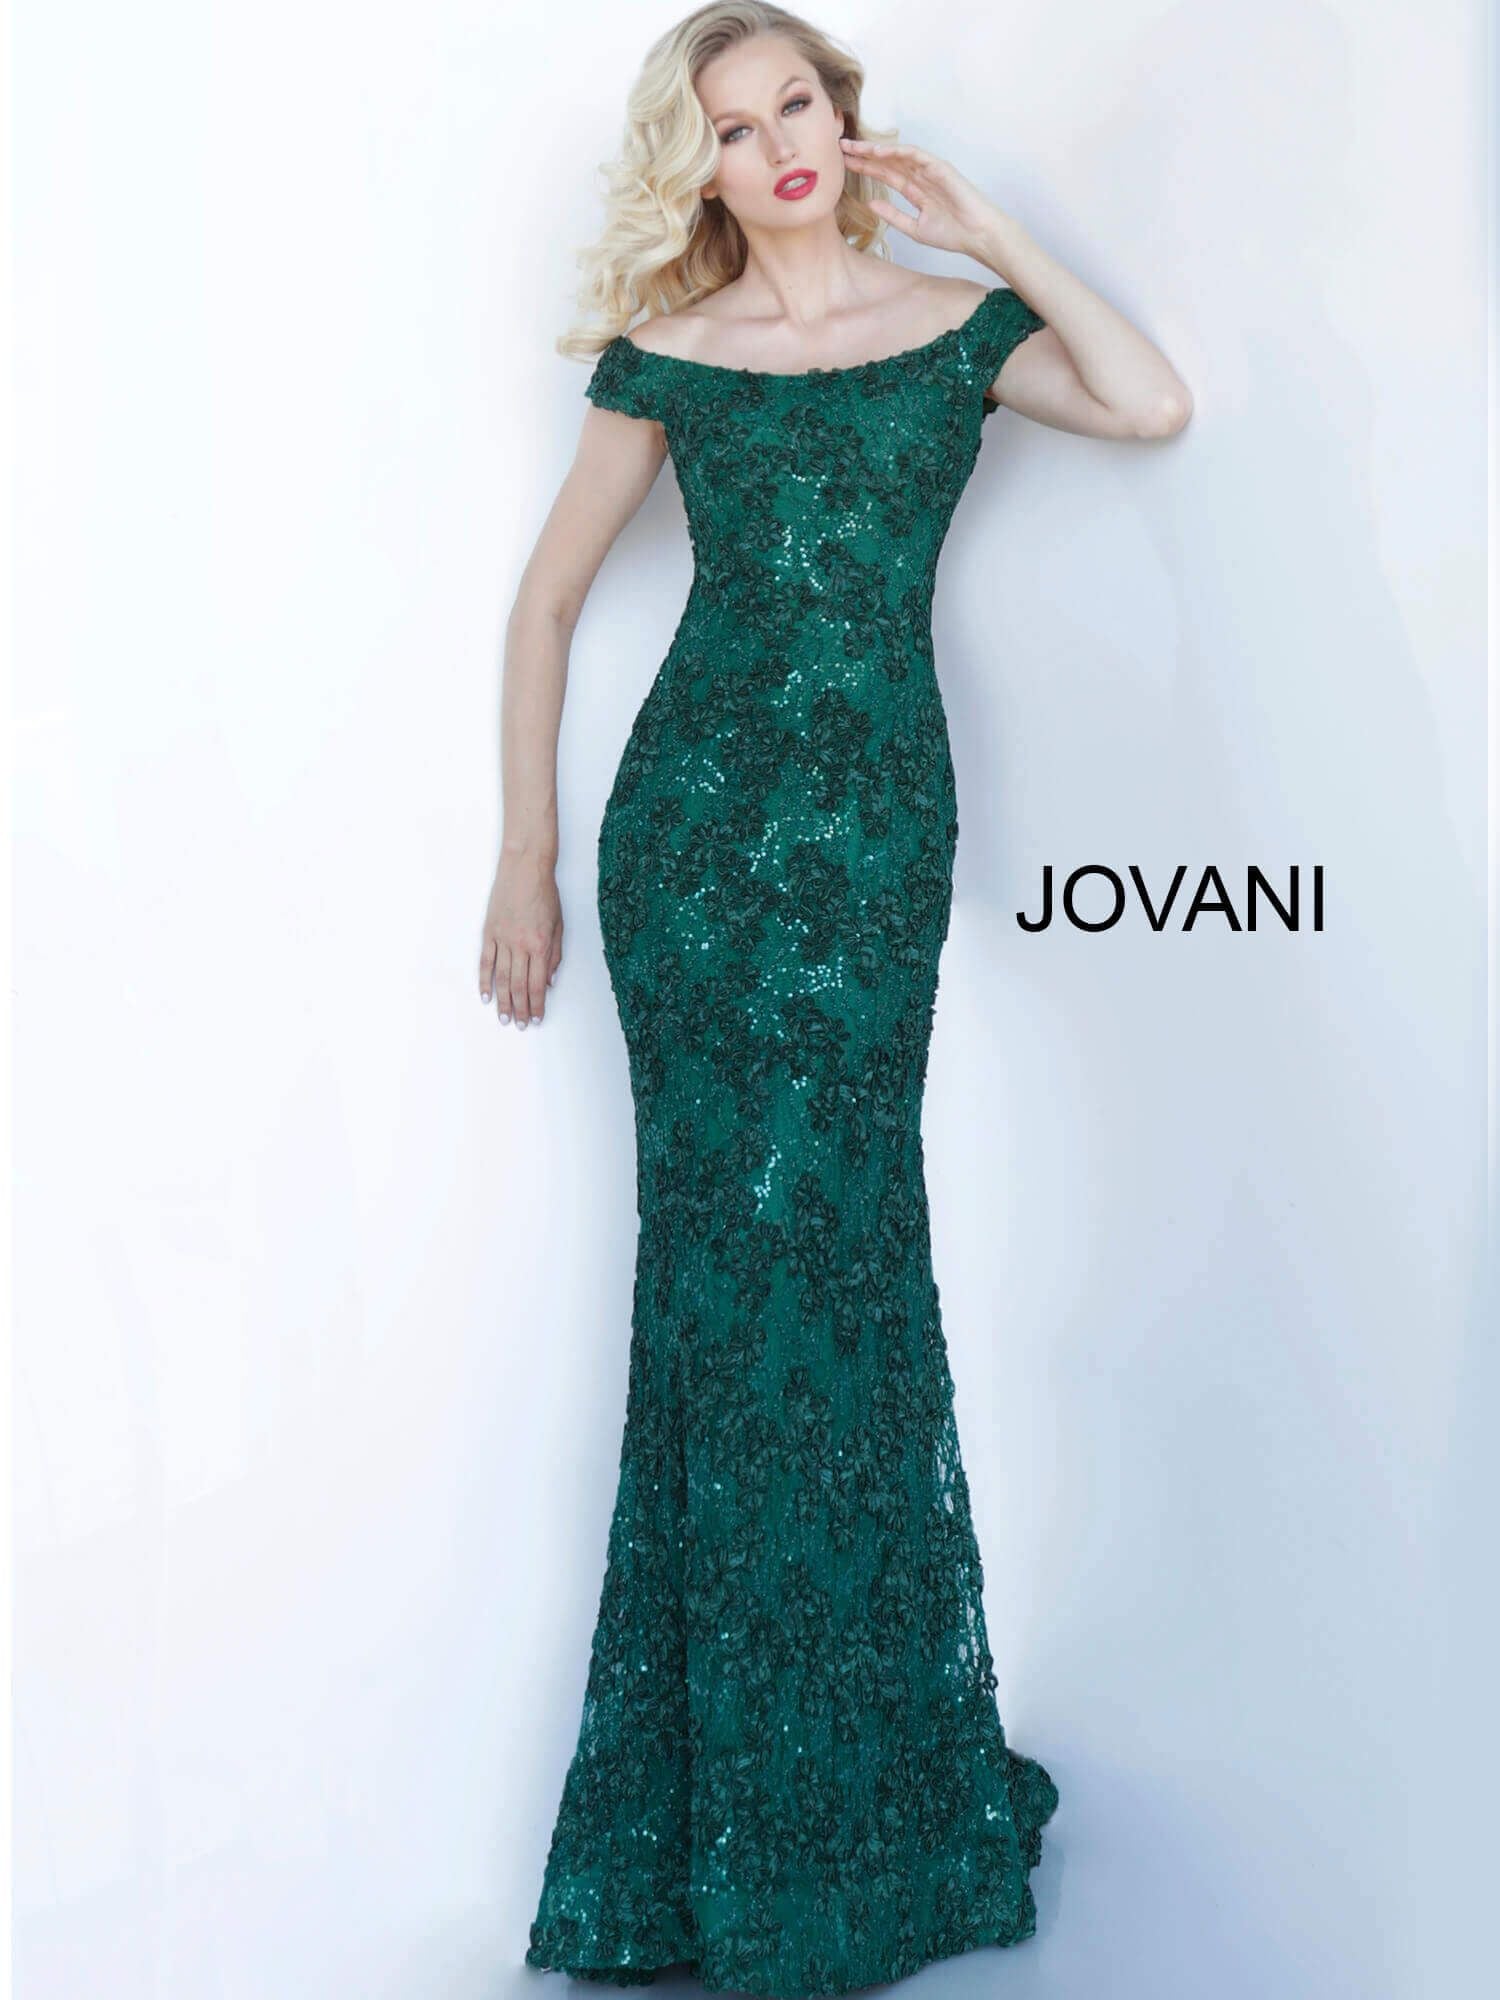 Jovani 1910 off the shoulder embellished evening gown  Available colors:  Black, Emerald, Plum, Red  Available sizes:  00-24 